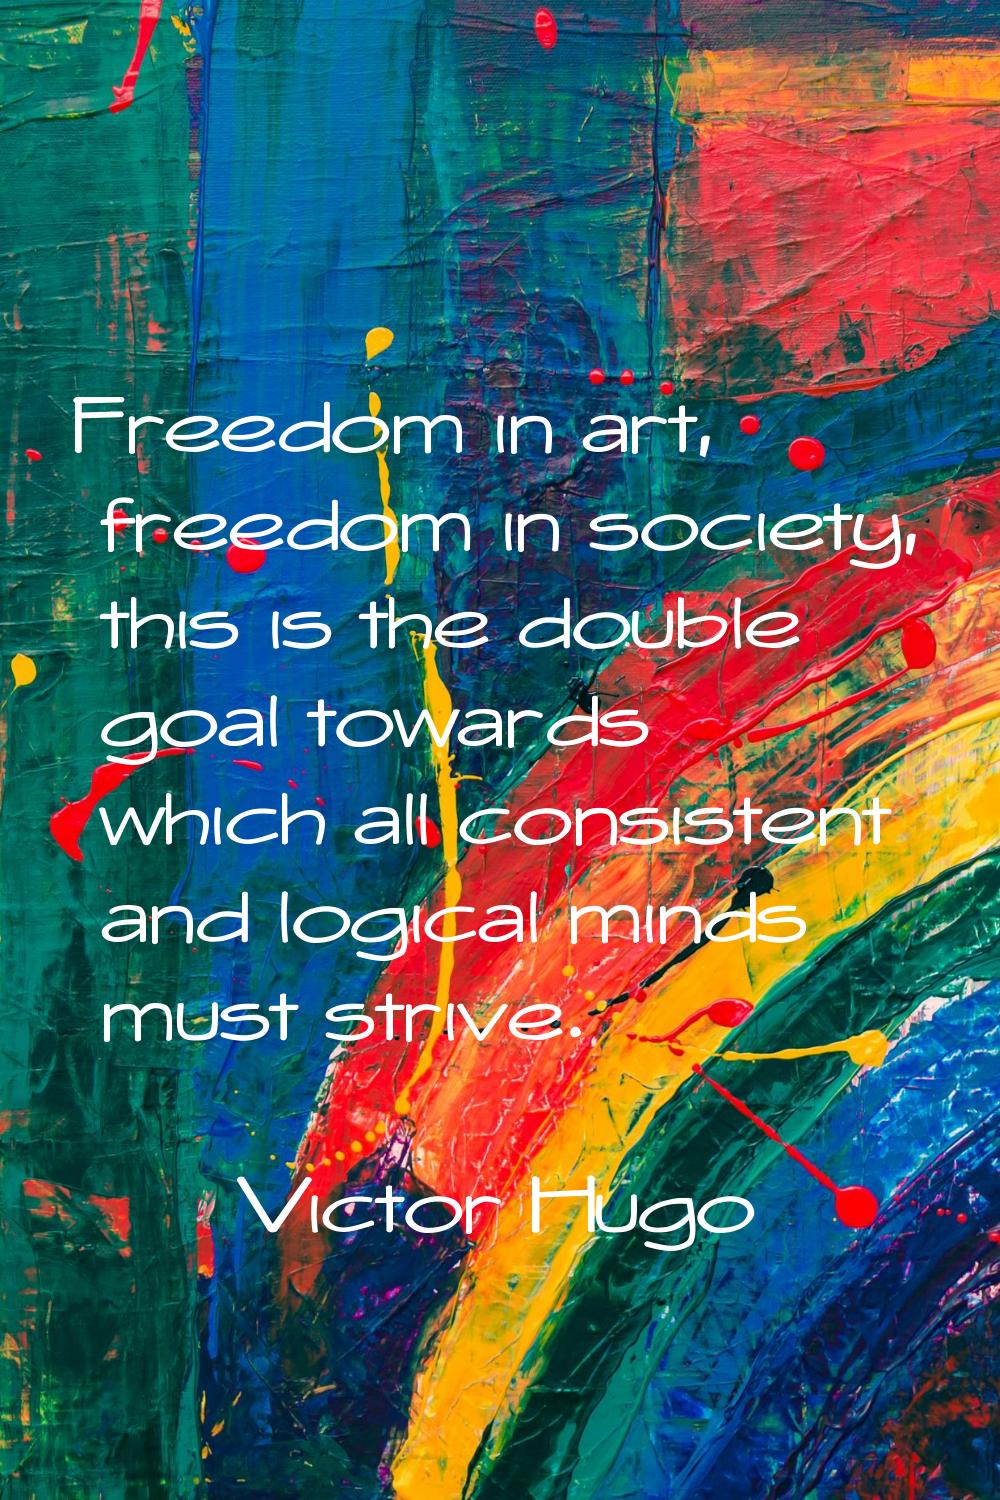 Freedom in art, freedom in society, this is the double goal towards which all consistent and logica